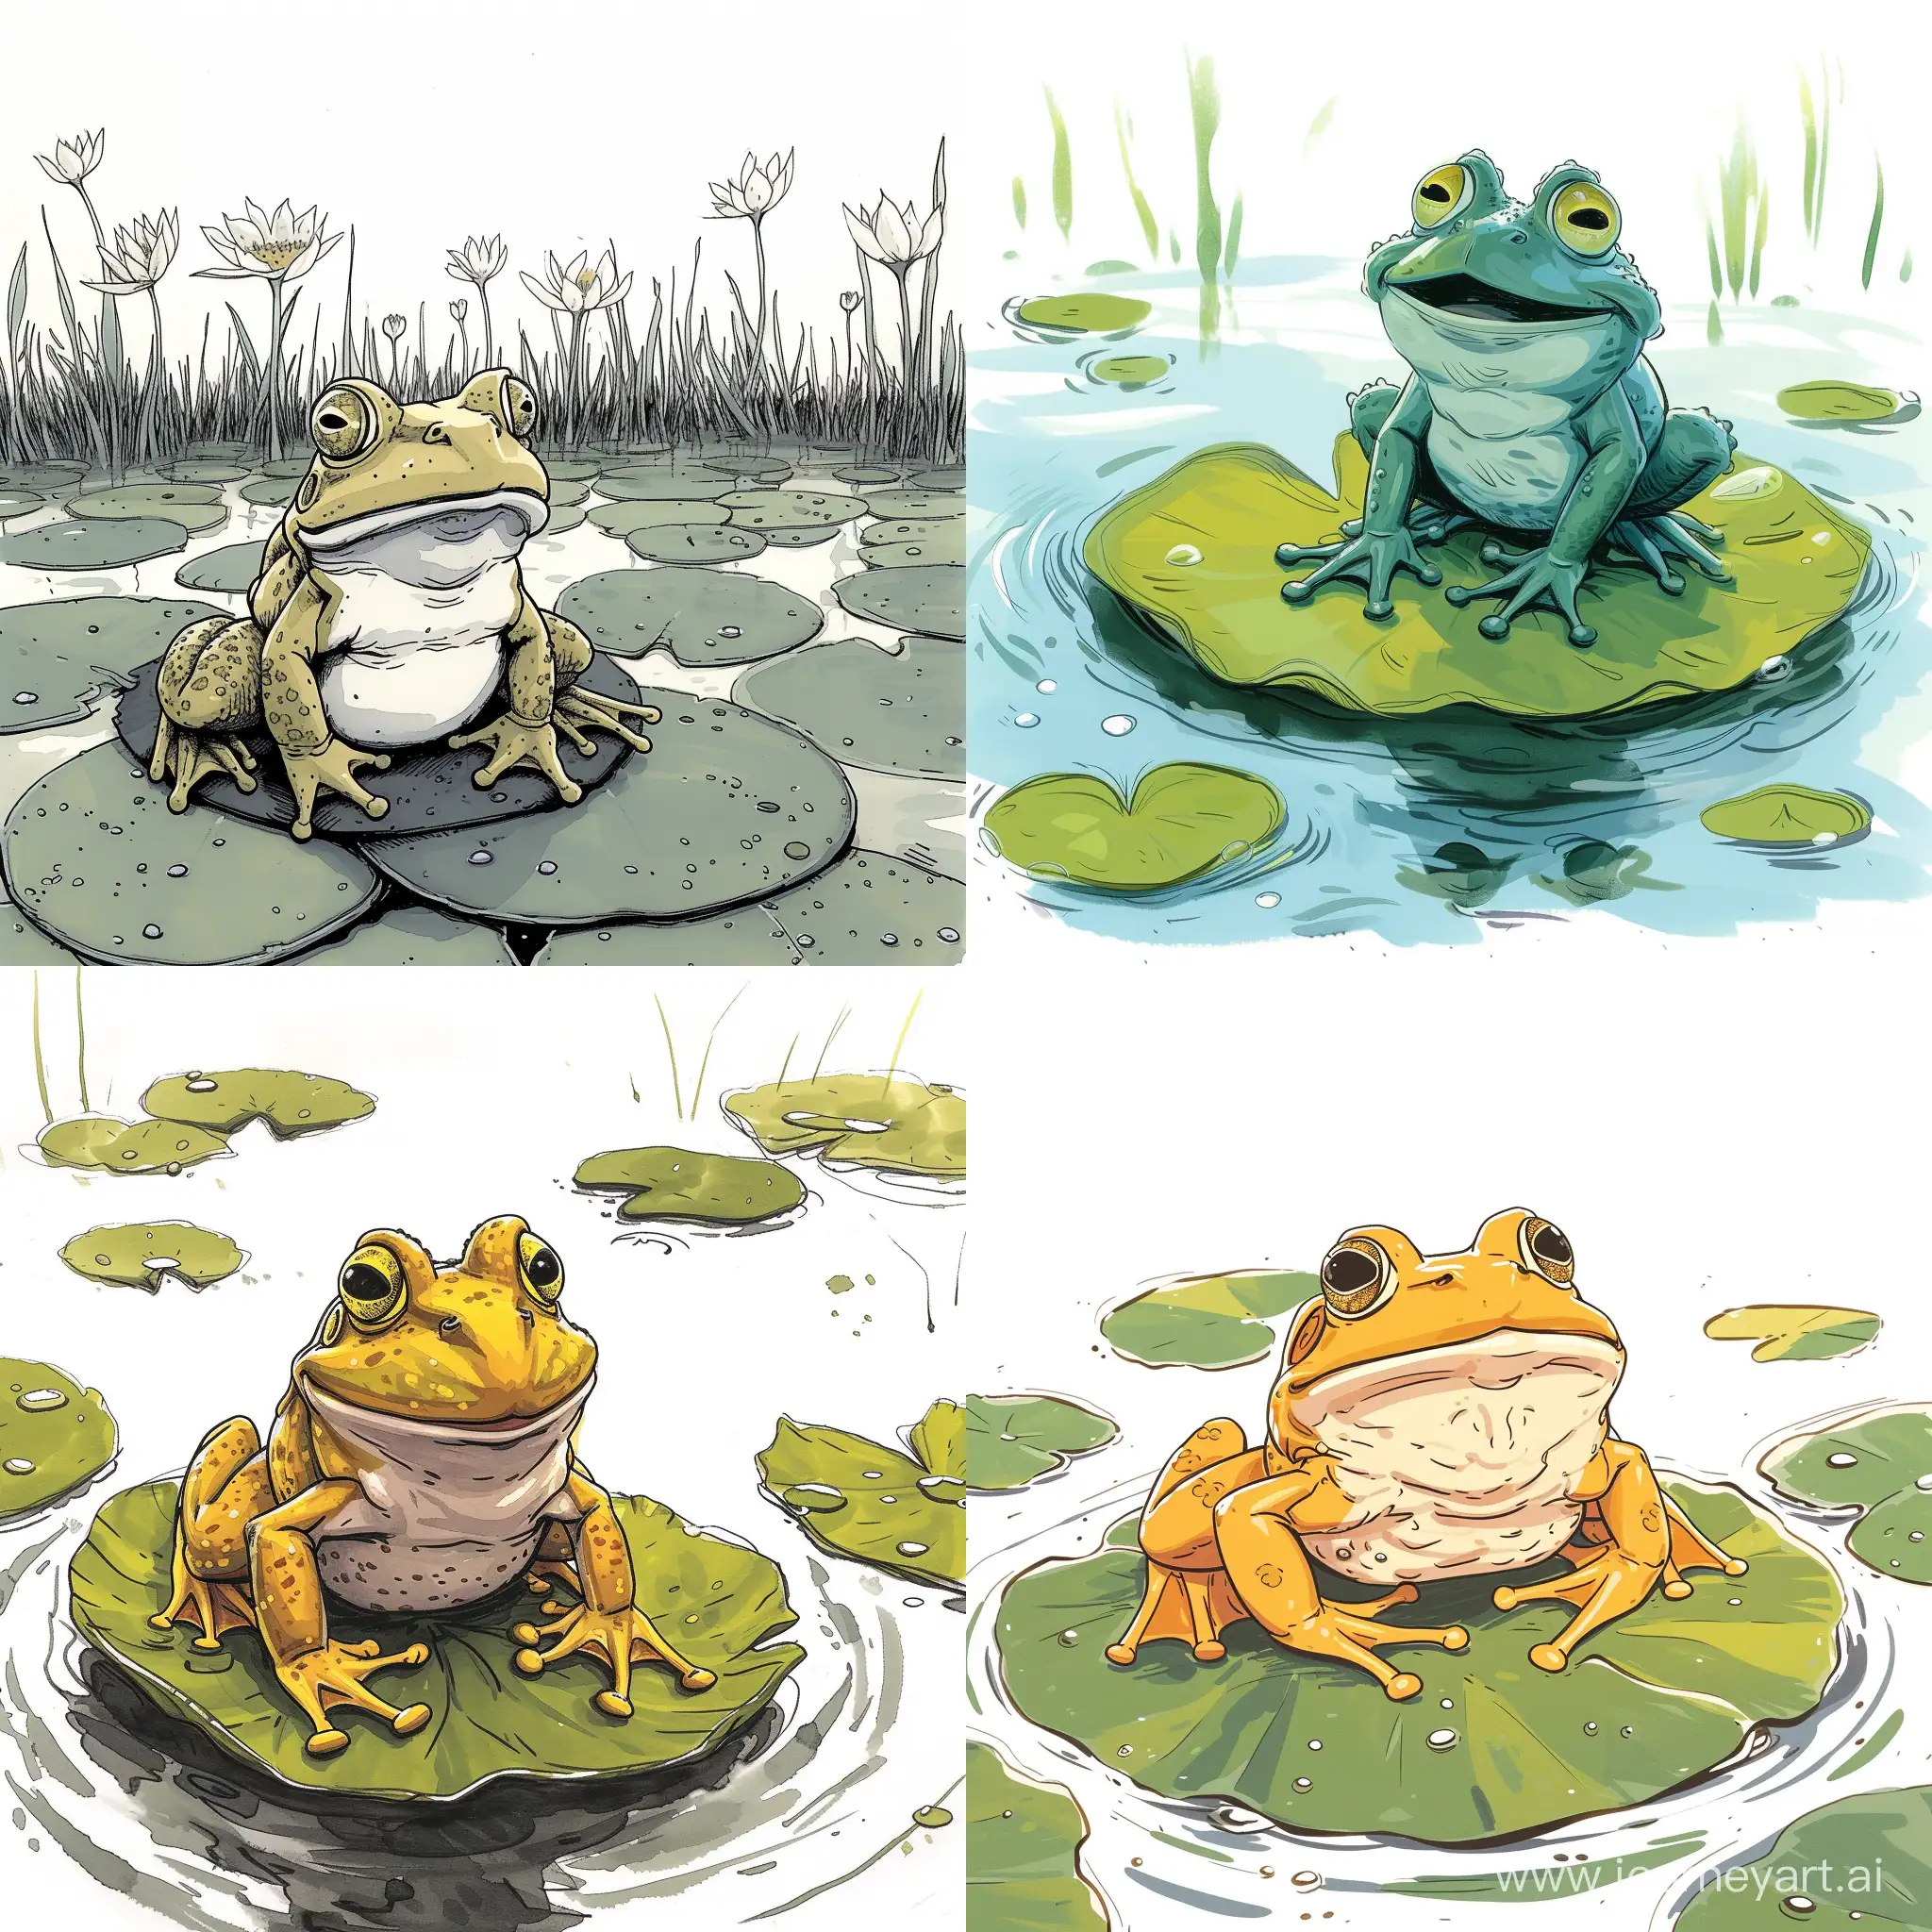  A cute frog on a lily pad in a swamp, many expressions, chubby, funky, swag, close-up, detailed ink illustration, colorful, pixar, isolated on white background, in the style of Frank and Dr. Seuss - Stylized 750